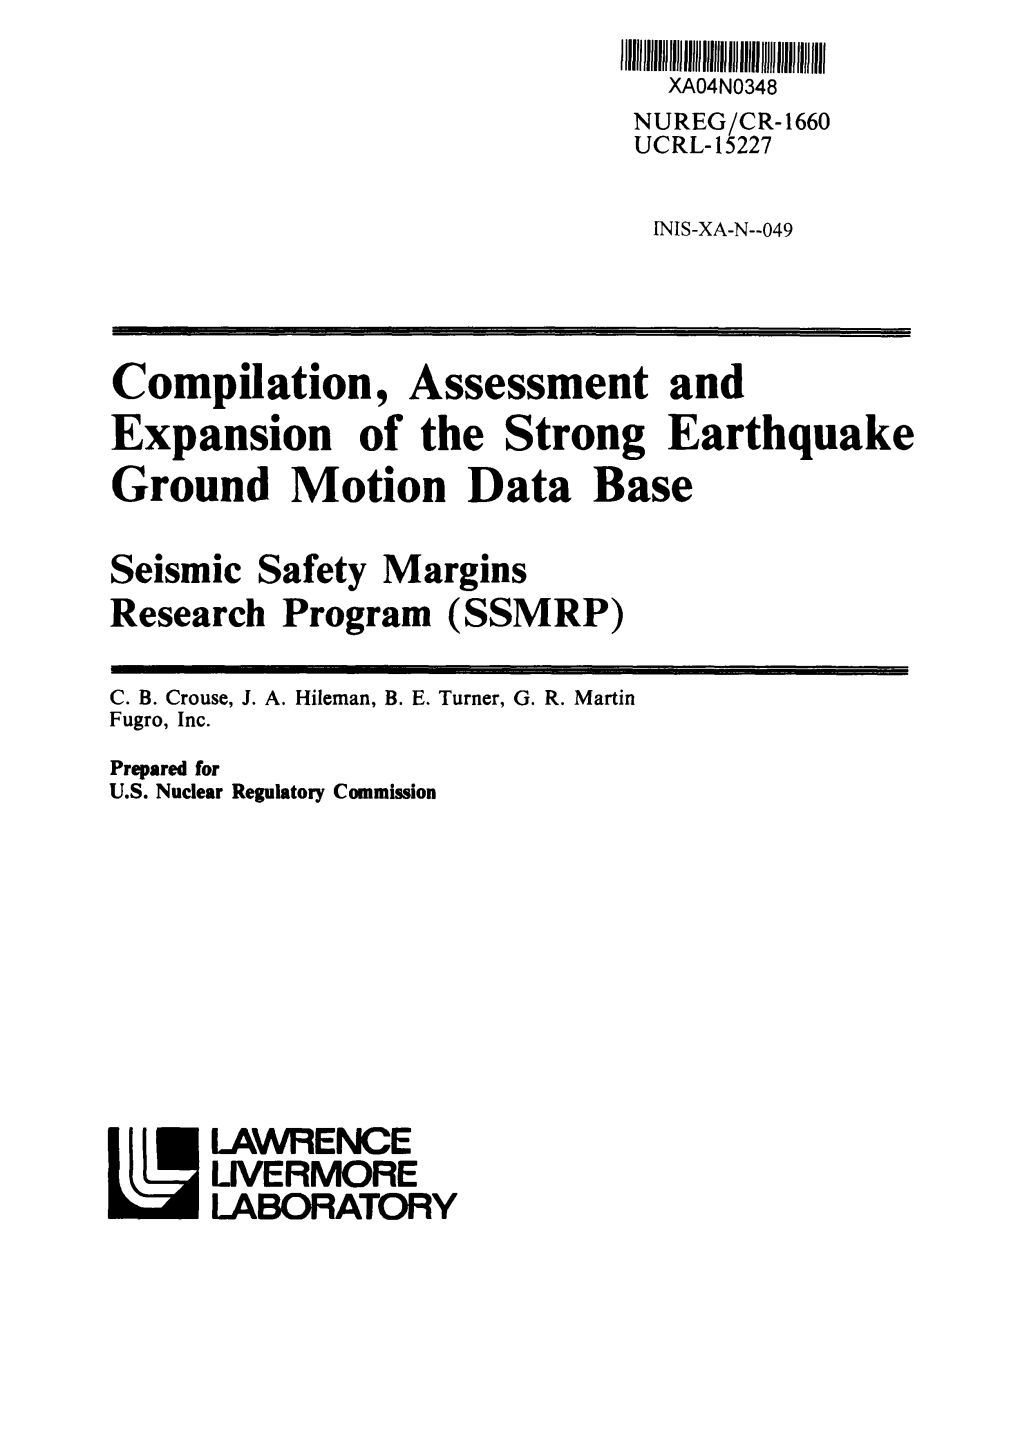 Compilation, Assessment and Expansion of the Strong Earthquake Ground Motion Data Base Seismic Safety Margins Research Program (SSMRP)